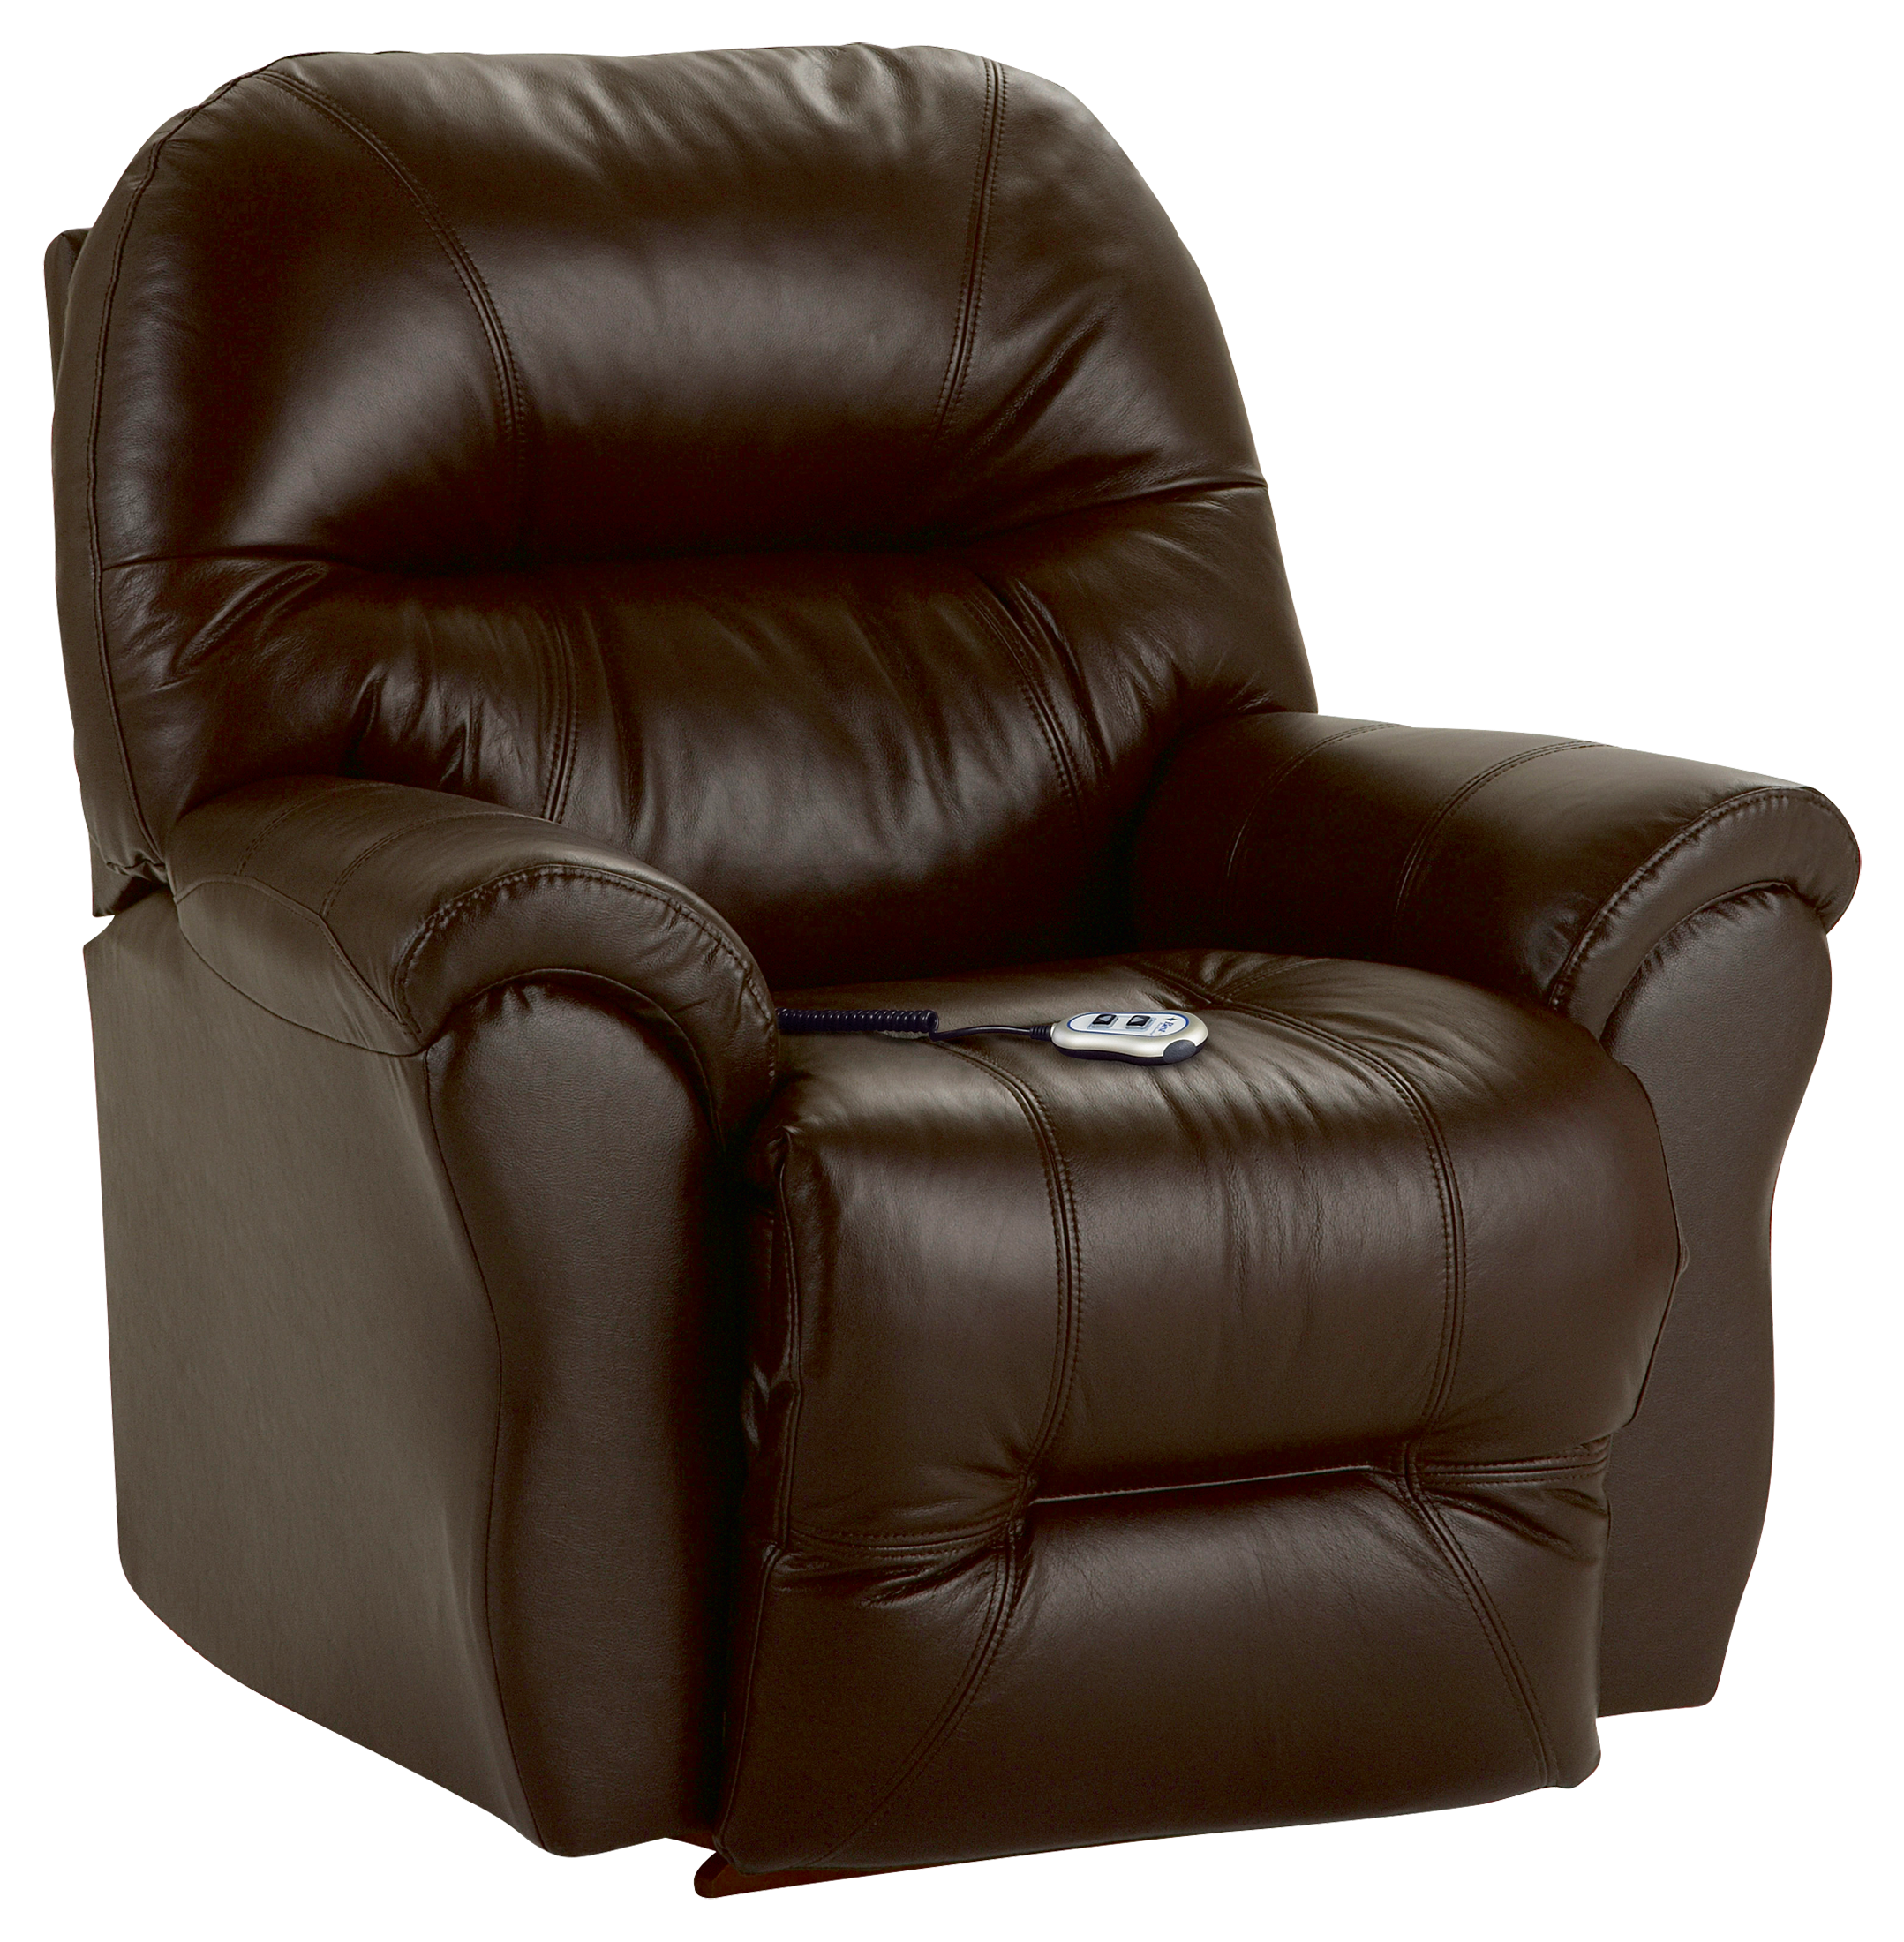 Best Home Furnishings Bodie Leather Power Rocker Recliner - Chocolate